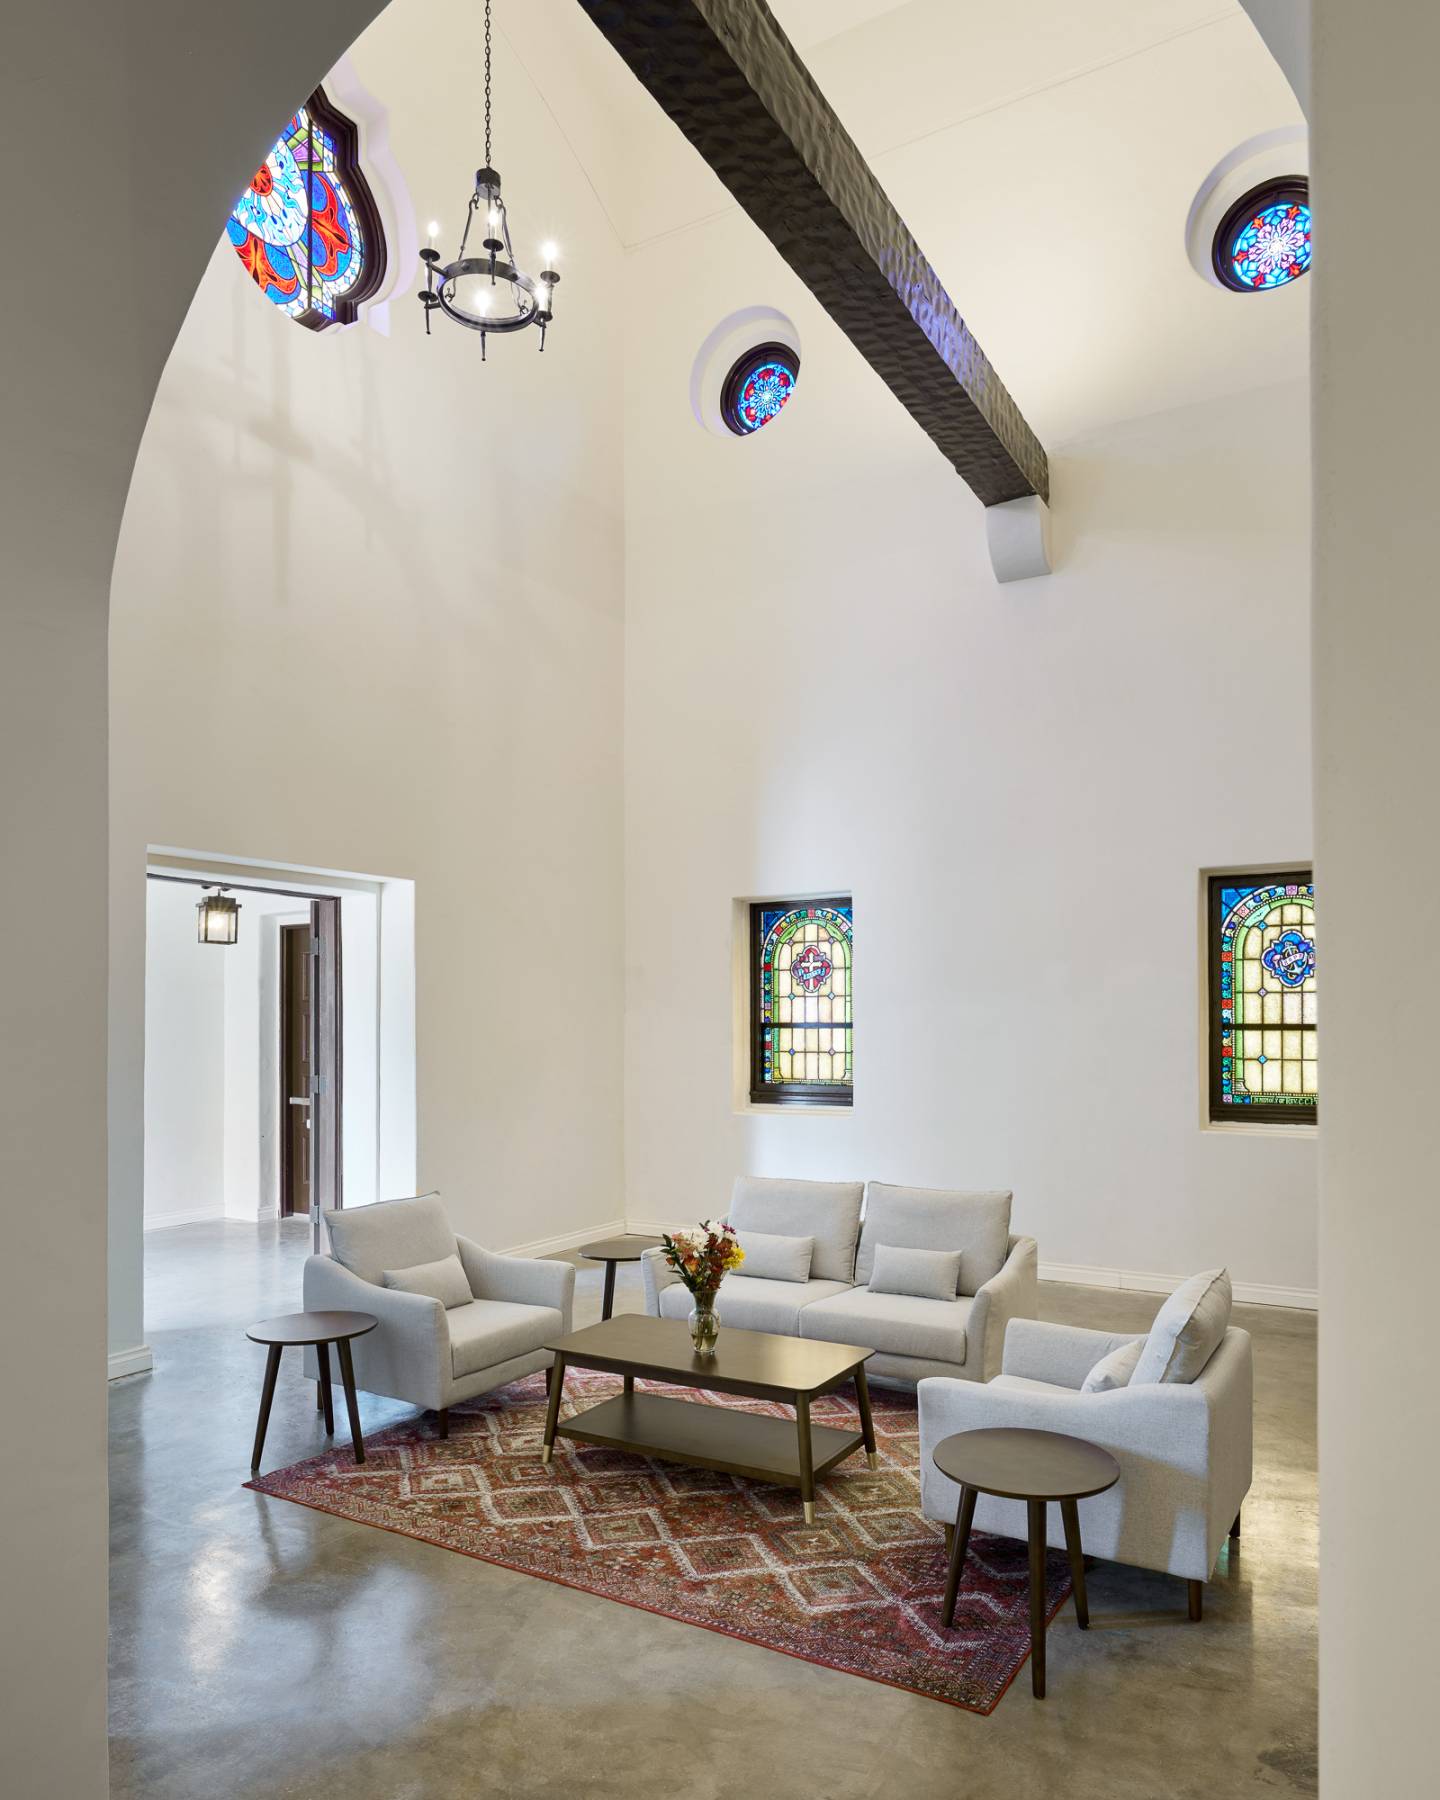 Photo of a common indoor sitting area in Washington View Apartments. Building has high ceilings and stained glass windows. Three couches are pictured.